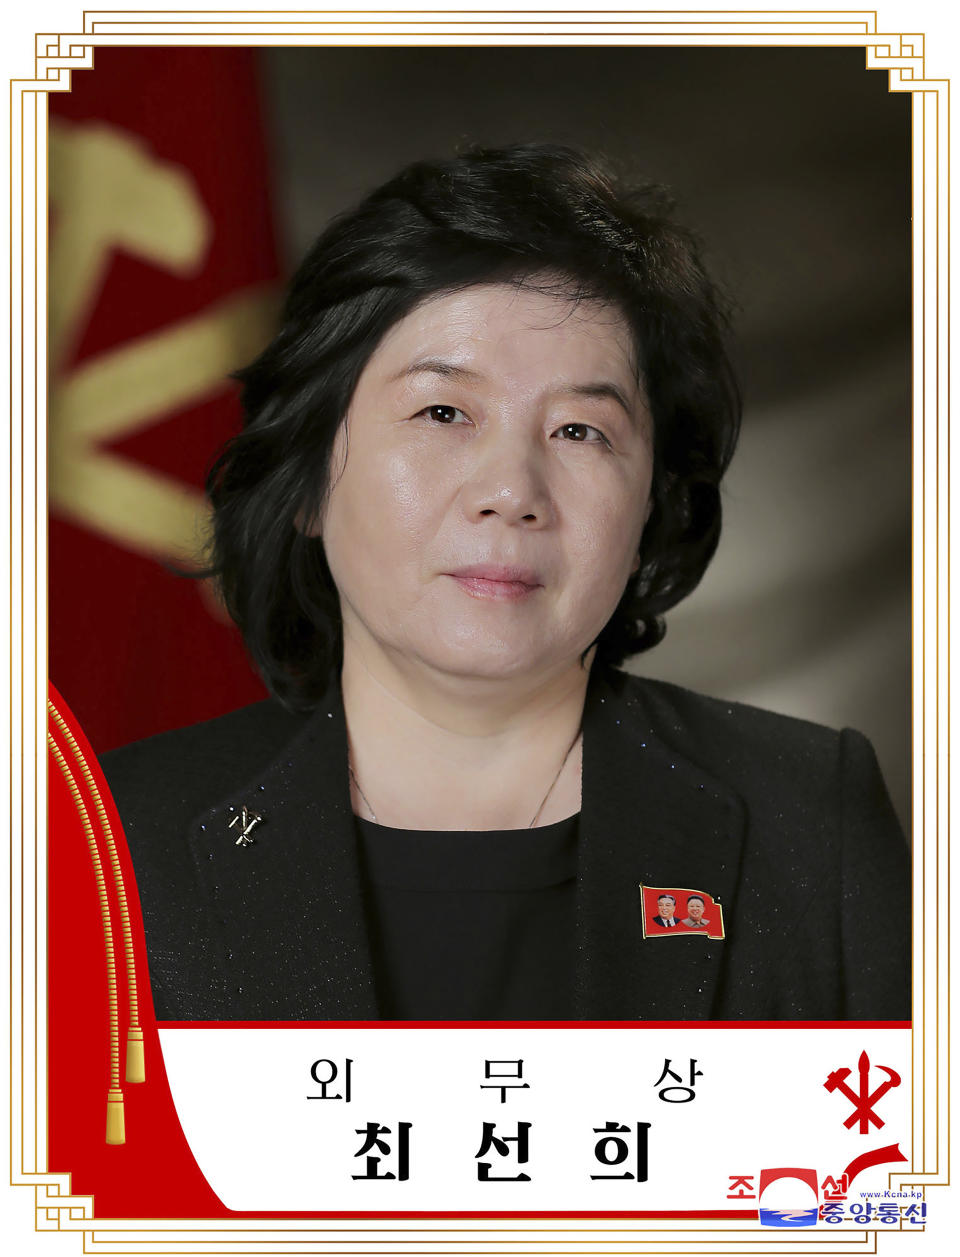 This undated photo provided on Saturday, June 11, 2022 by the North Korean government, shows Choe Sun Hui. North Korean leader Kim Jong Un promoted the veteran diplomat with deep experience in handling U.S. affairs as his new foreign minister during a plenary meeting of the ruling Workers’ Party’s Central Committee convened during June 8 - June 10, 2022. Independent journalists were not given access to cover the event depicted in this image distributed by the North Korean government. The content of this image is as provided and cannot be independently verified. Korean language watermark on image as provided by source reads: "KCNA" which is the abbreviation for Korean Central News Agency. (Korean Central News Agency/Korea News Service via AP)